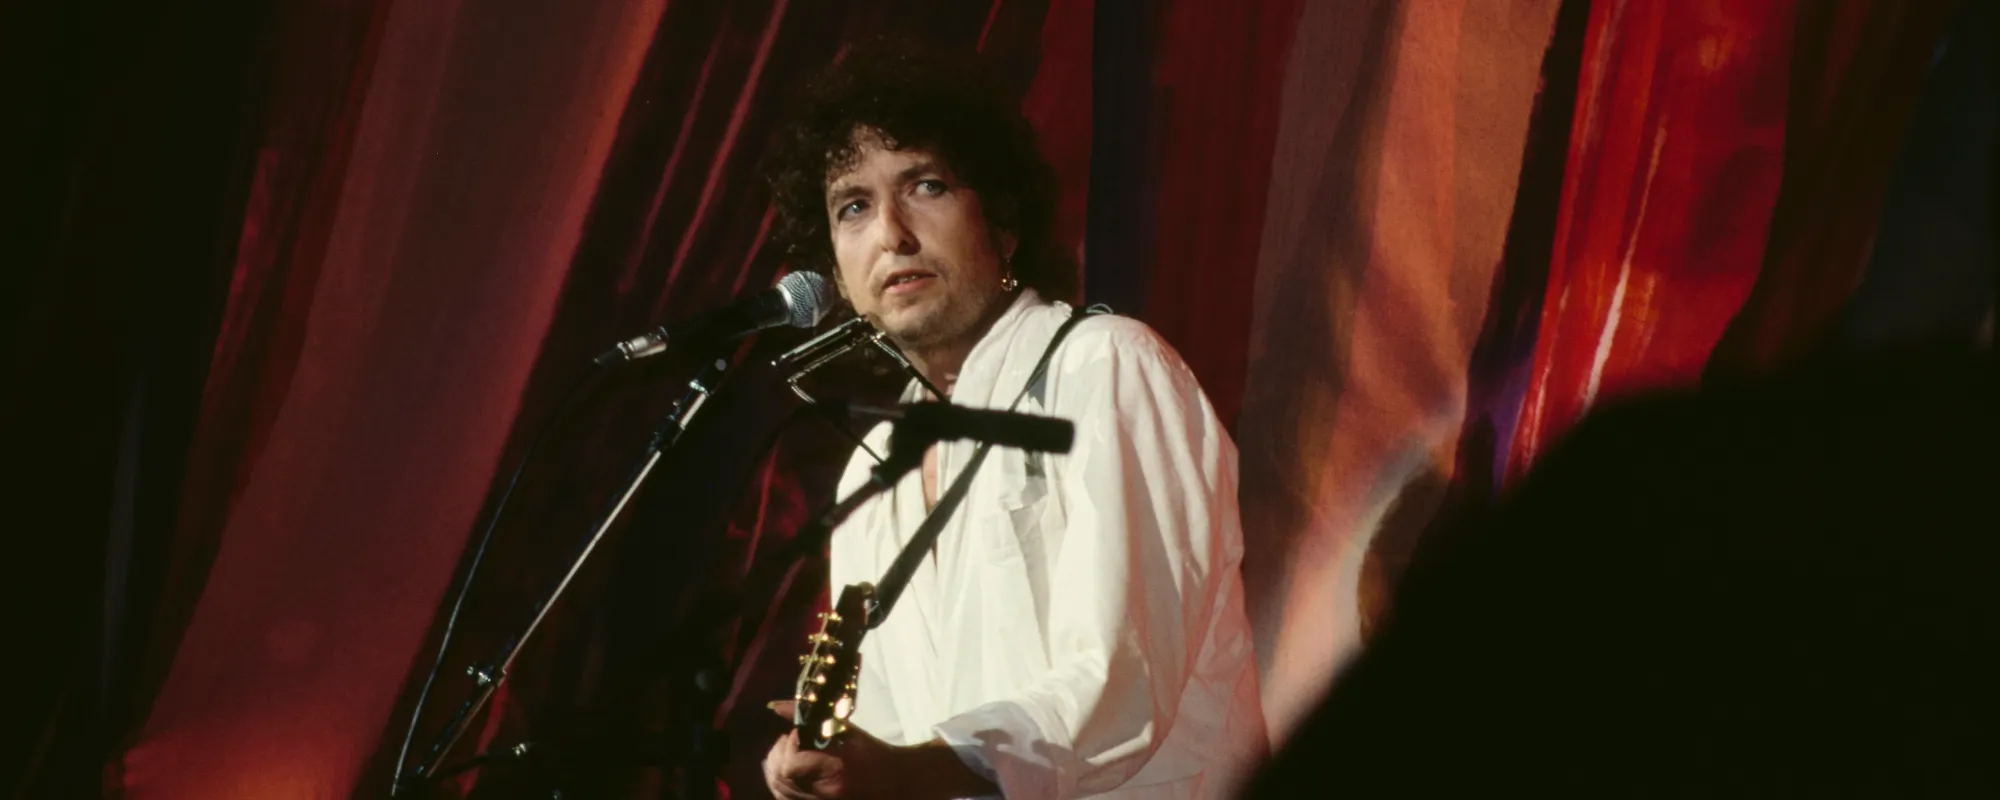 Ranking the Top 5 Bob Dylan Songs of the ’80s